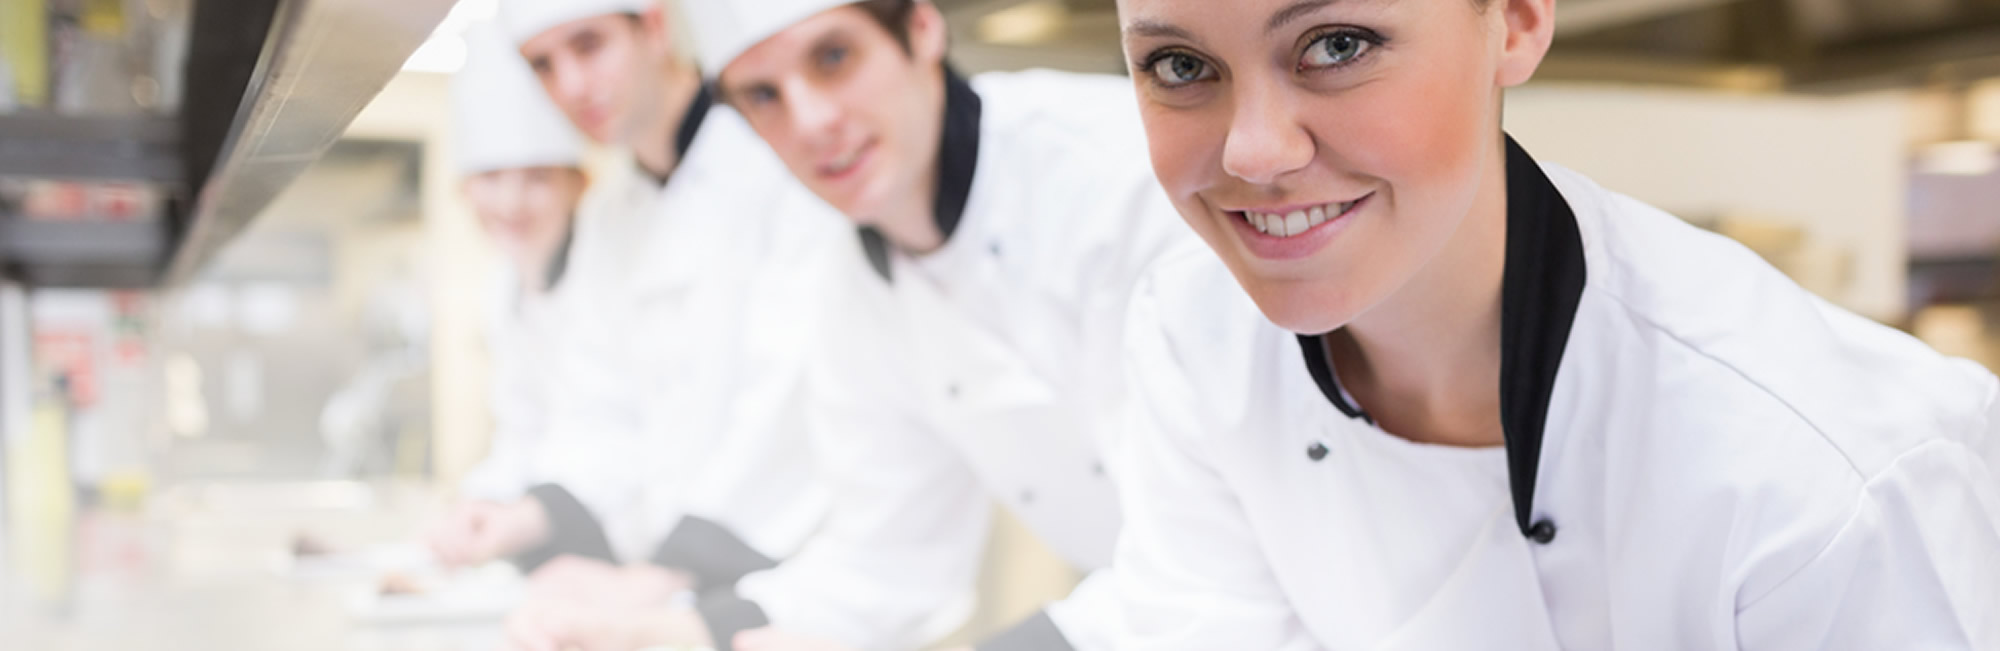 Why Chef Uniforms Are Important￼ - Laundryheap Blog - Laundry & Dry Cleaning